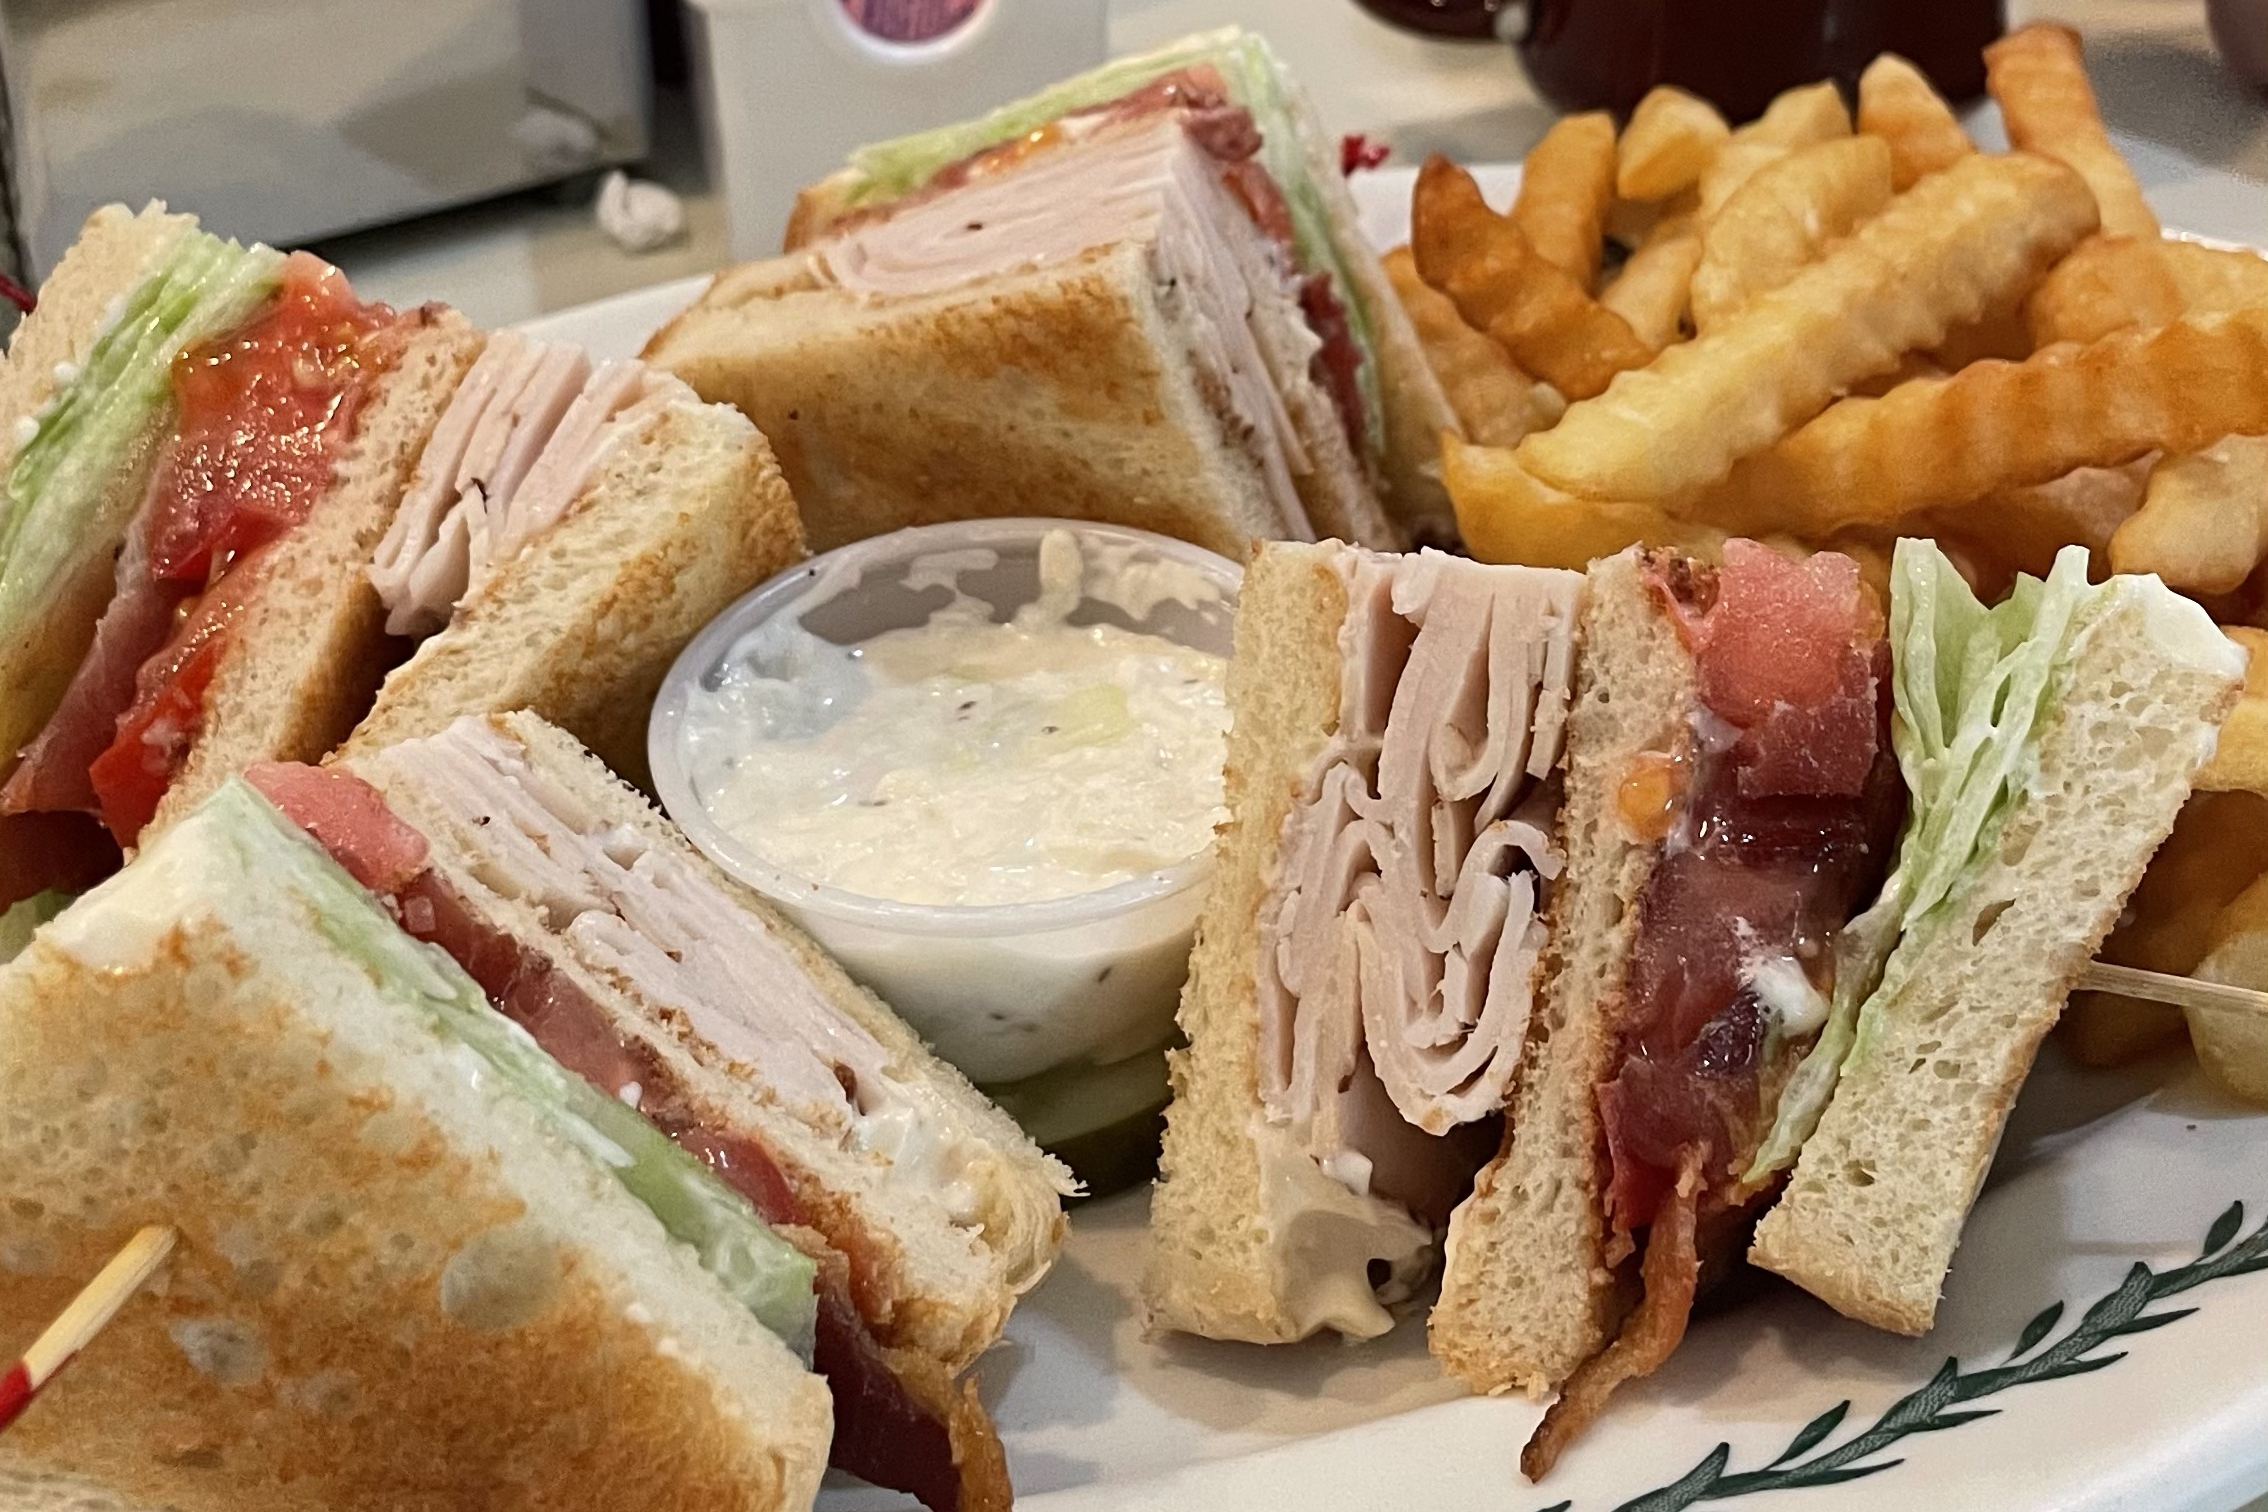 A club sandwich from Sparky's diner